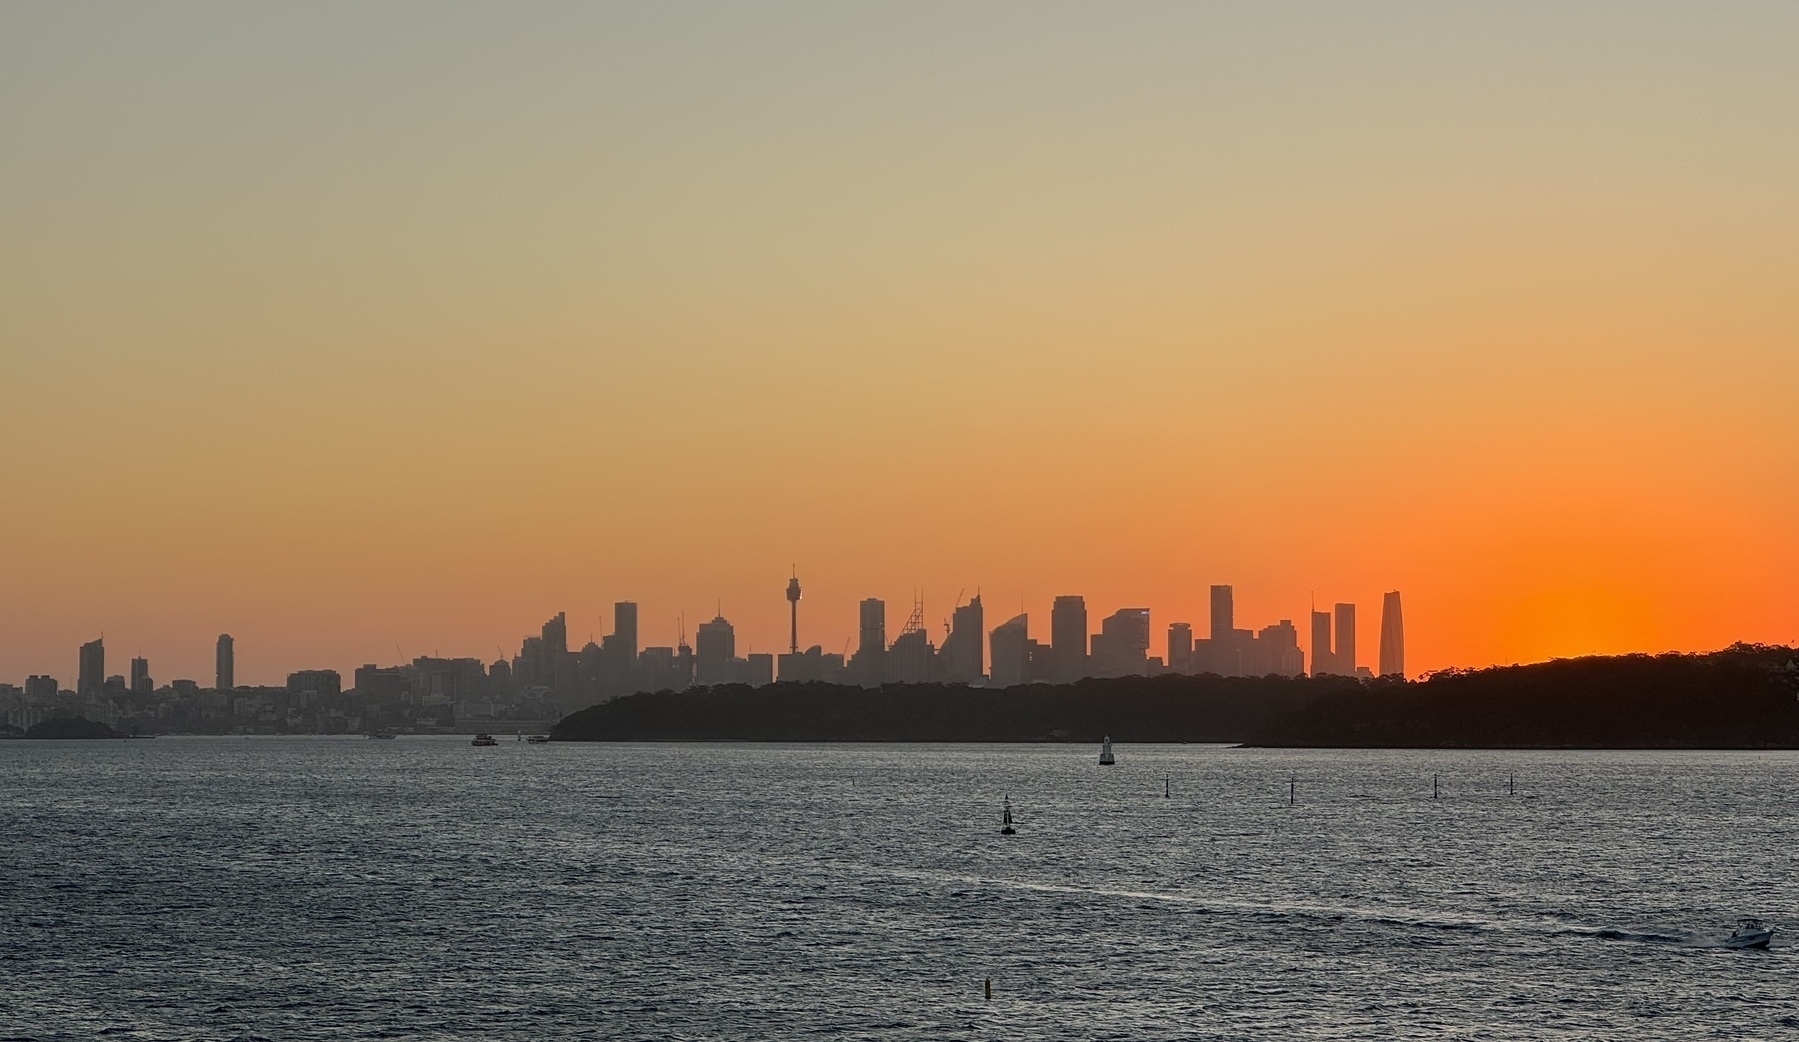 The skyline of Sydney just after the sun has gone down. Slightly hazy with an orange sky.